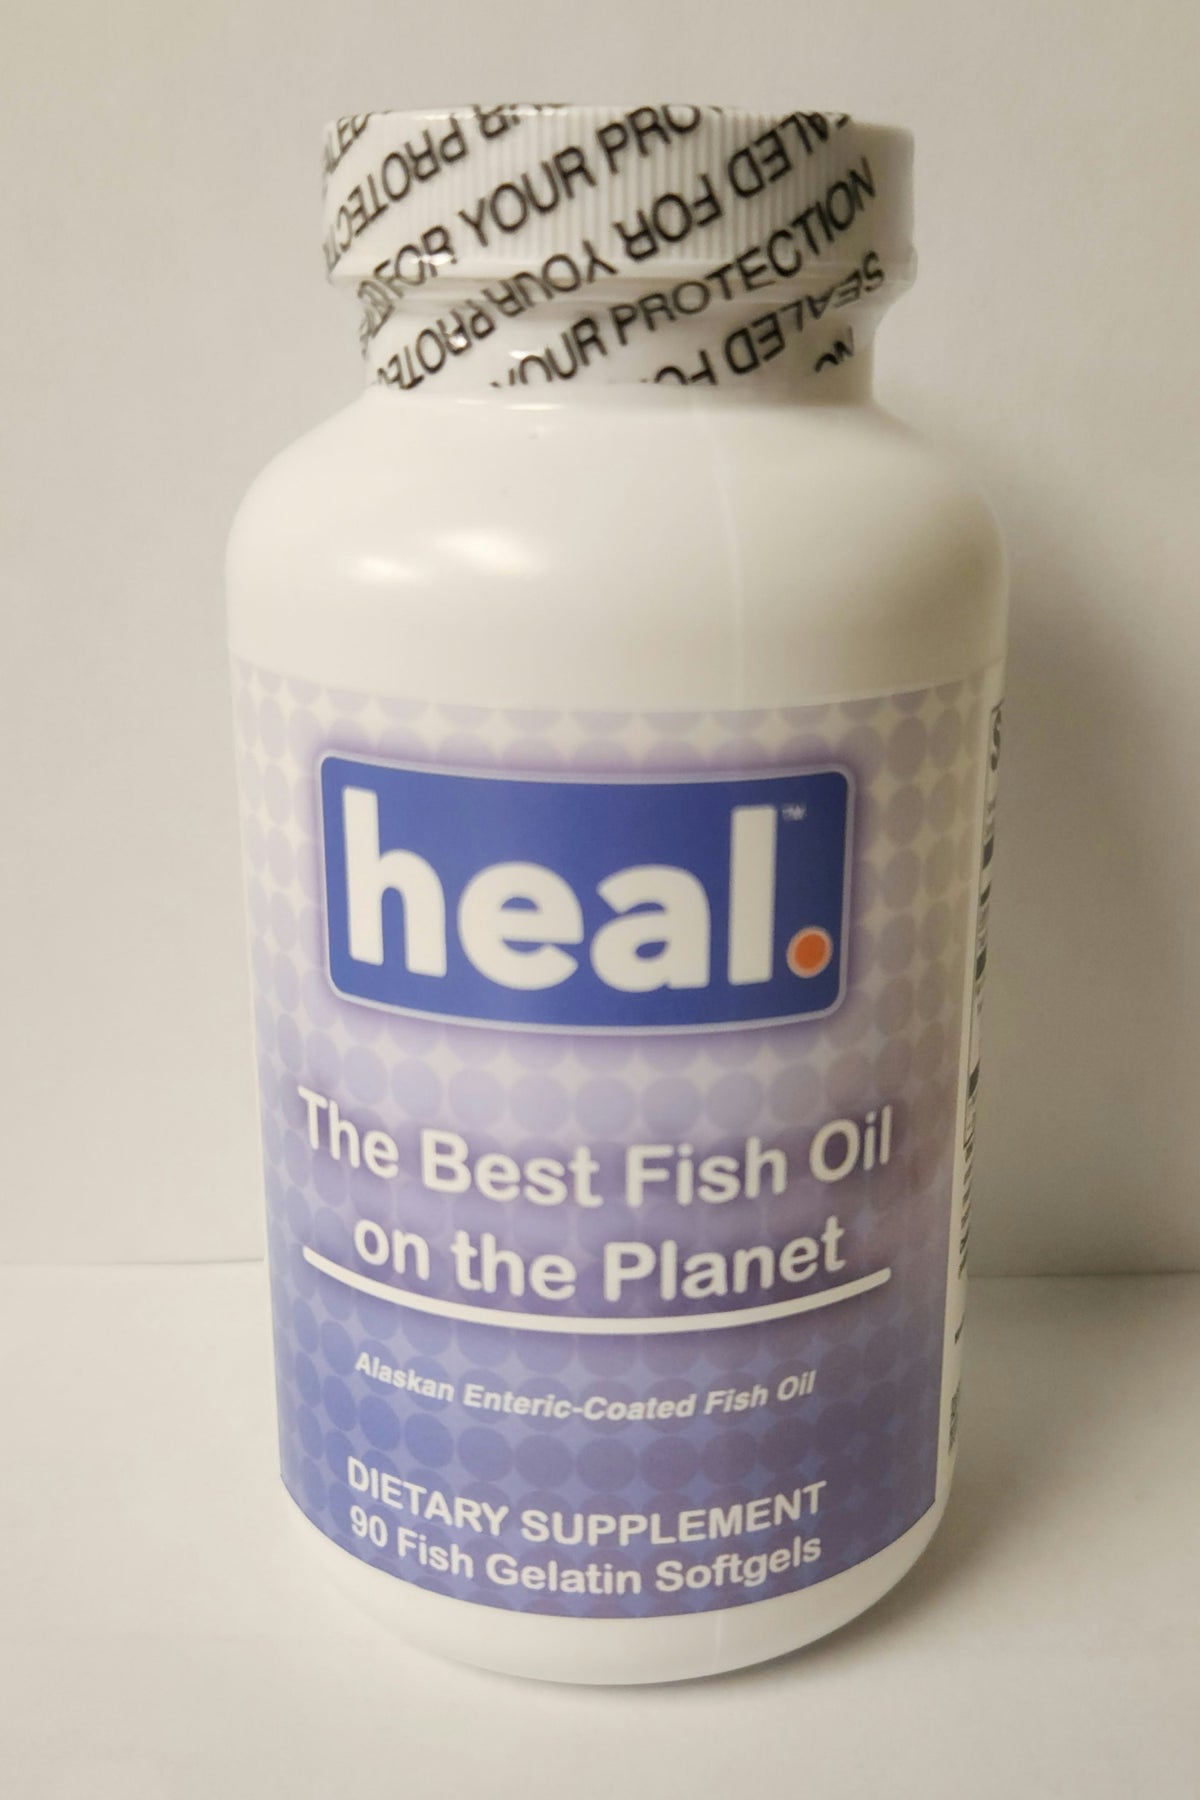 The Best Fish Oil